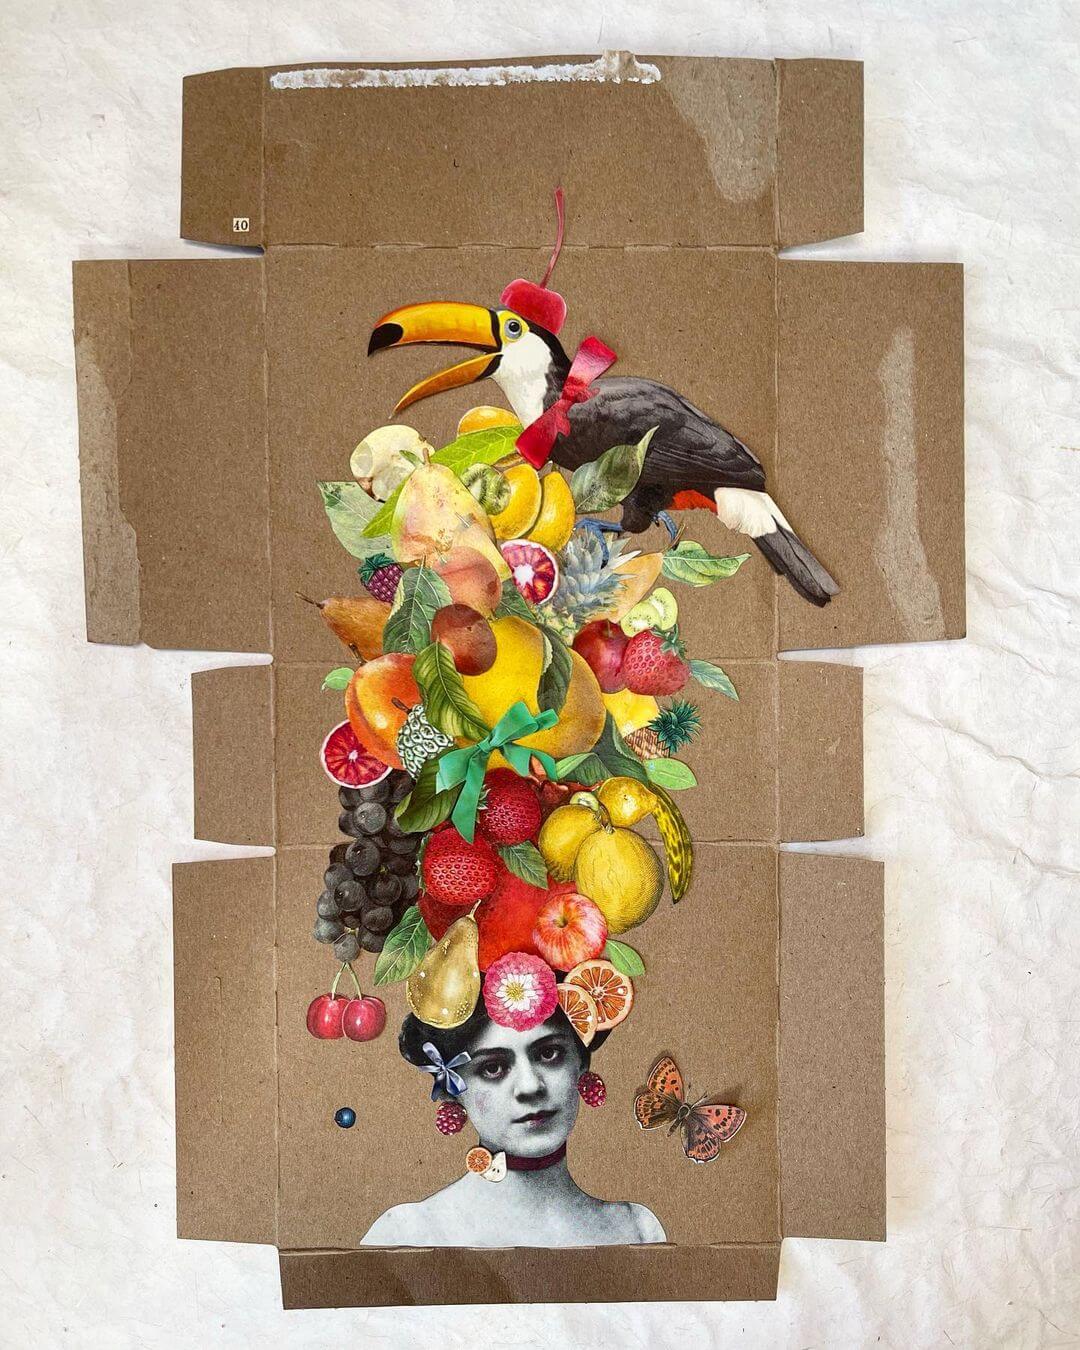 Flat cardboard box with colourful collage made from recycled magazines and newspapers of a woman with fruit and a toucan.